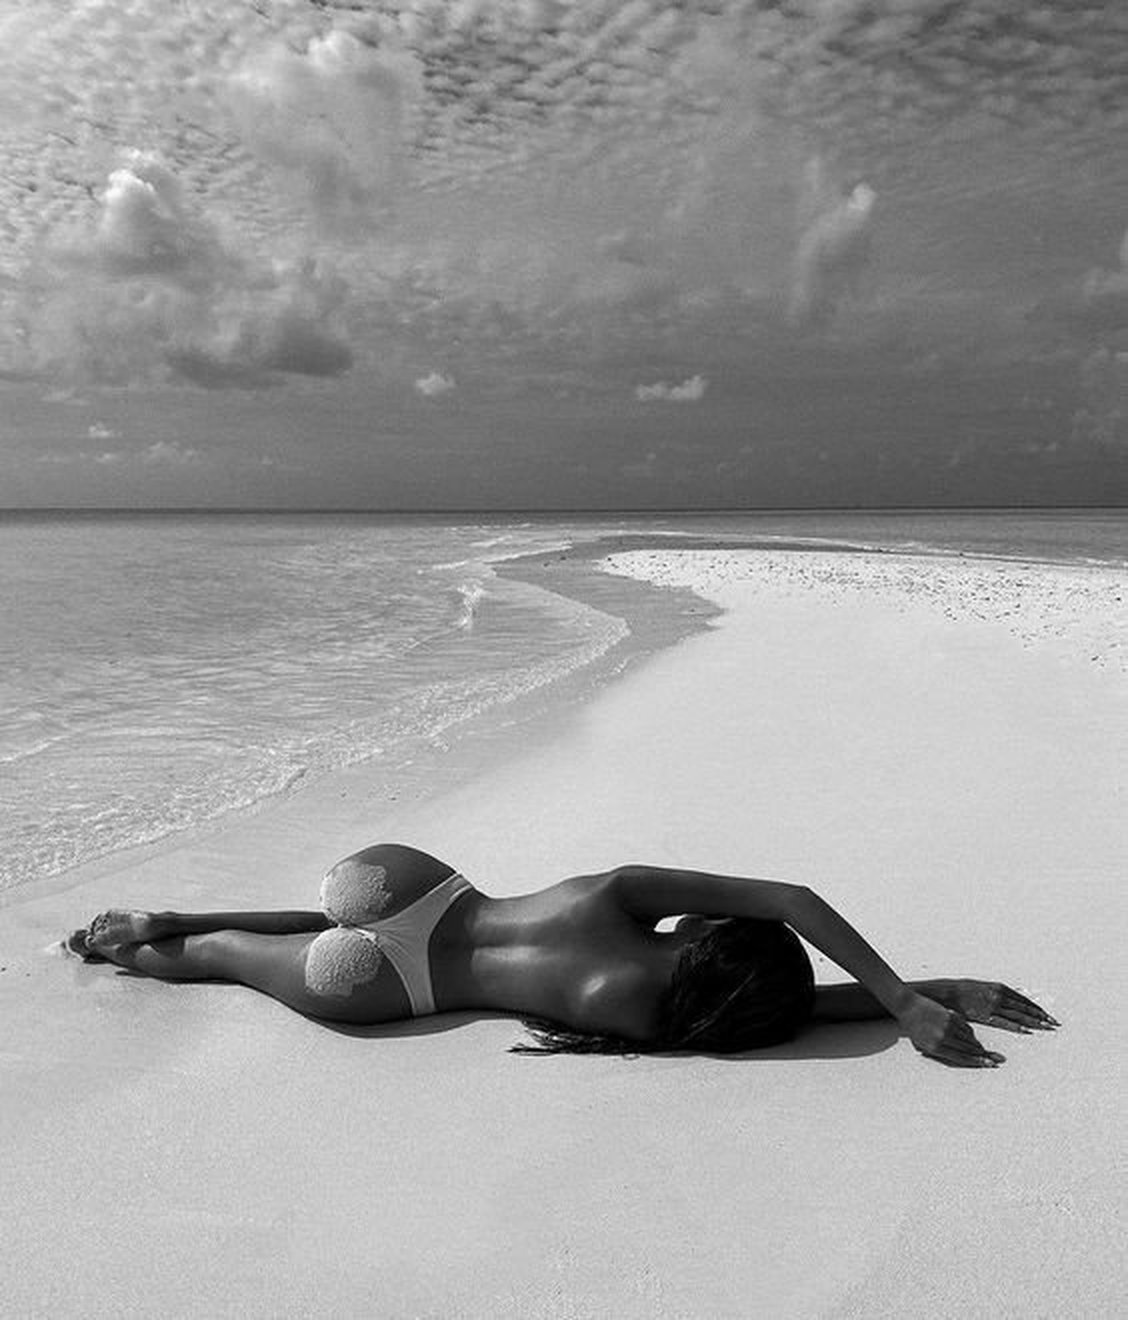 Watch the Photo by Devynsdogg with the username @Devynsdogg, posted on September 27, 2021. The post is about the topic Beauty of the Female Form. and the text says 'Beauty and the beach!  #wetgirls #blackandwhite #ass #bikinibabes #sexyfemales #blackbeauties #ebony'